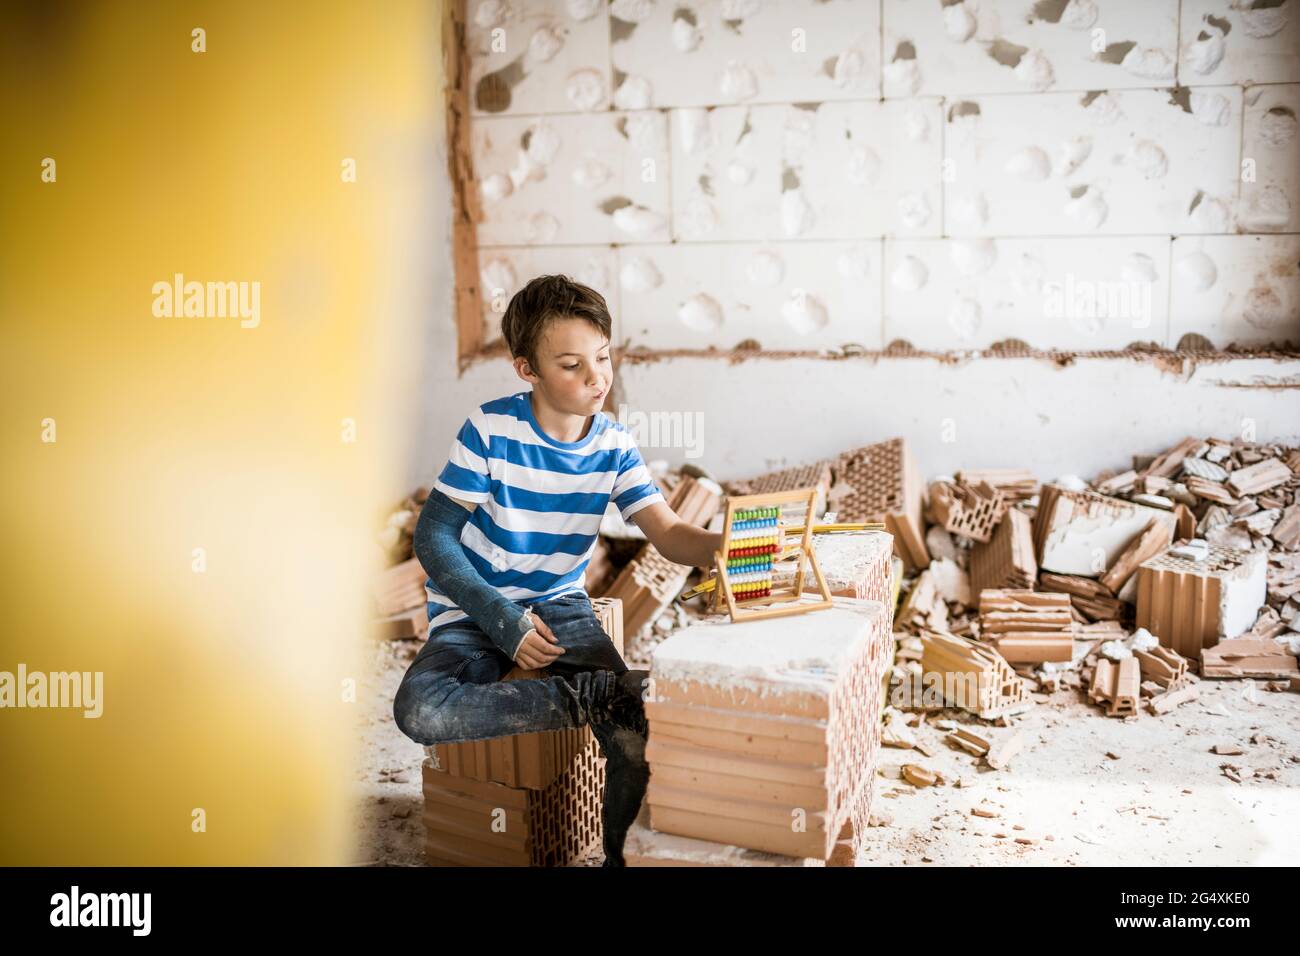 Boy counting bead of abacus toy at house during renovation Stock Photo